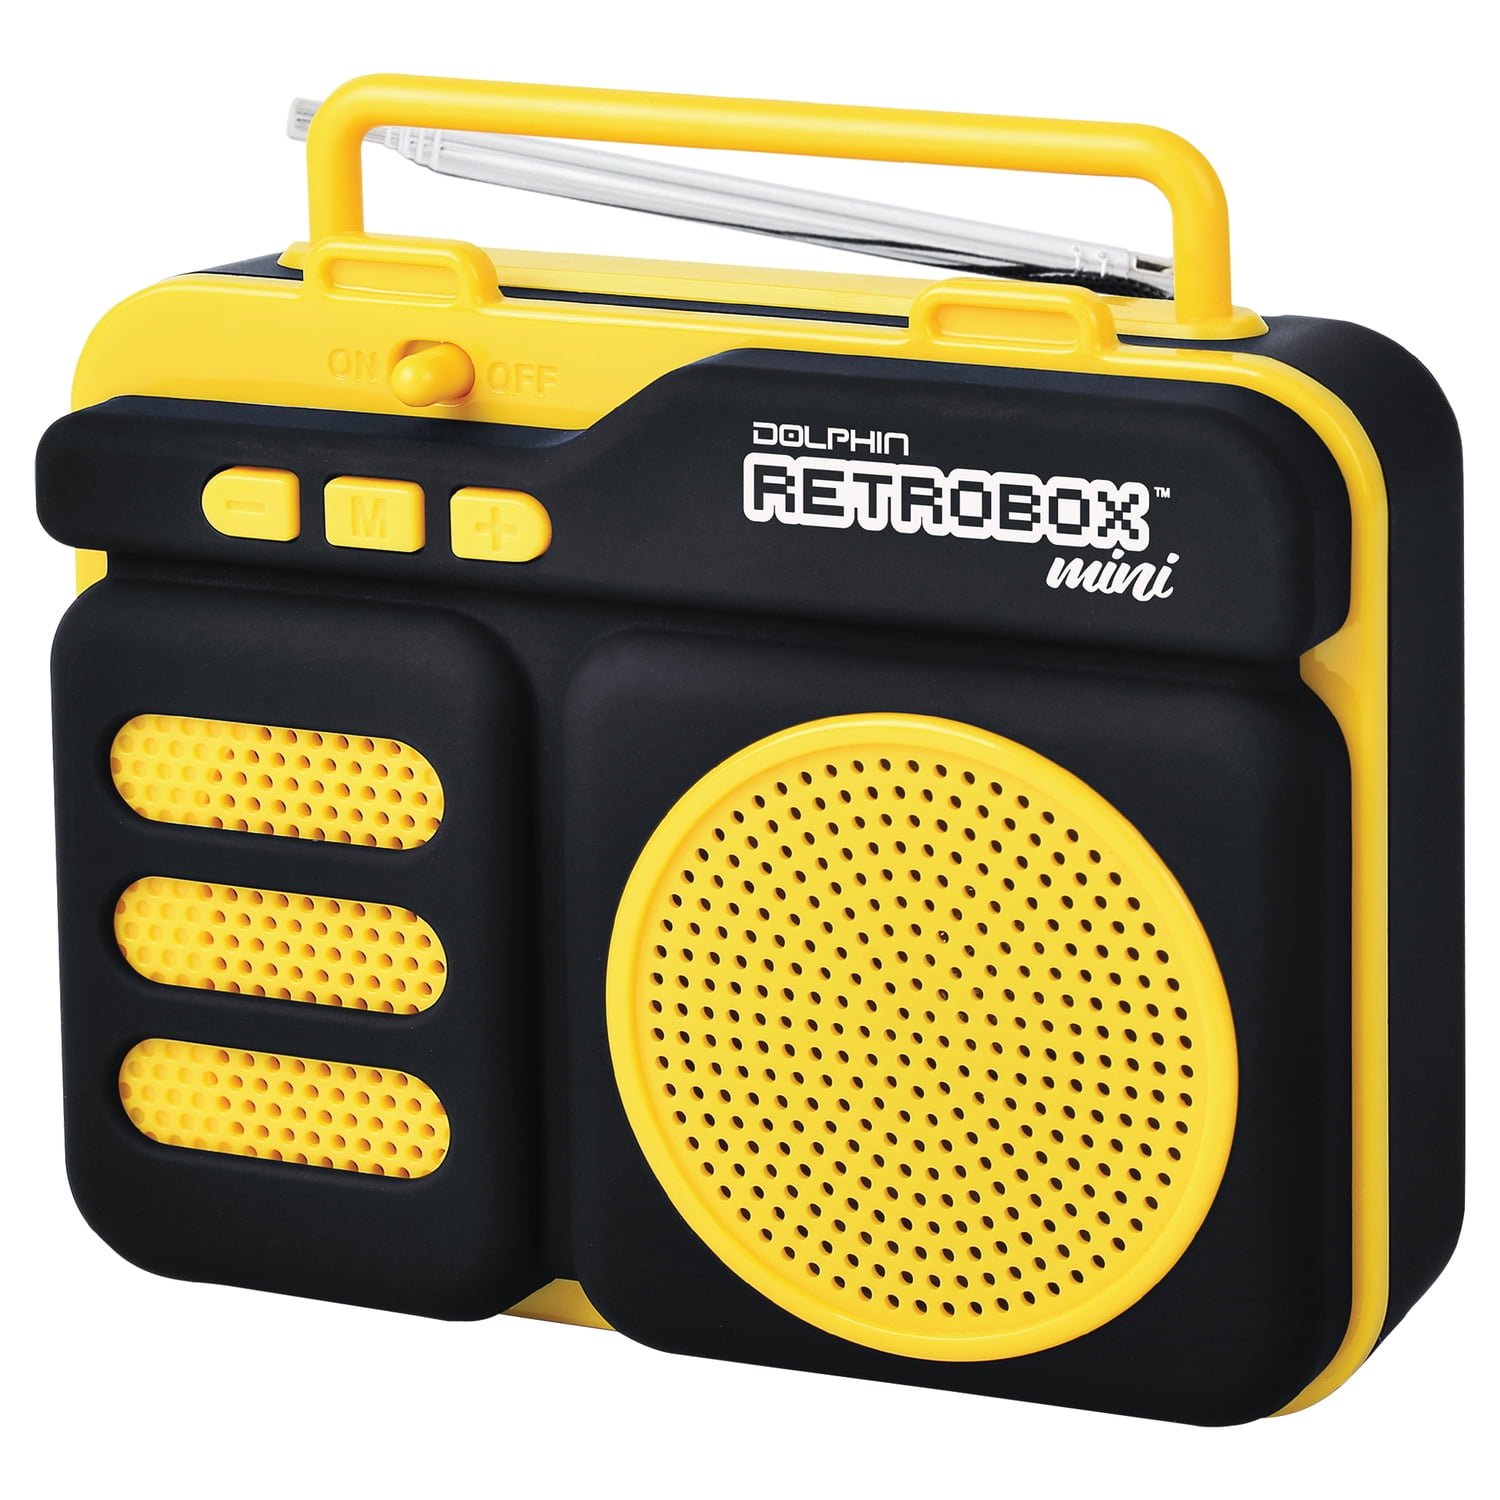  Dolphin Retrobox Mini for Jobsite, Small but Durable Bluetooth  Speakers with FM Radio, Rechargeable Music Device, Up to 12 Hour Play Time,  Yellow : Electronics